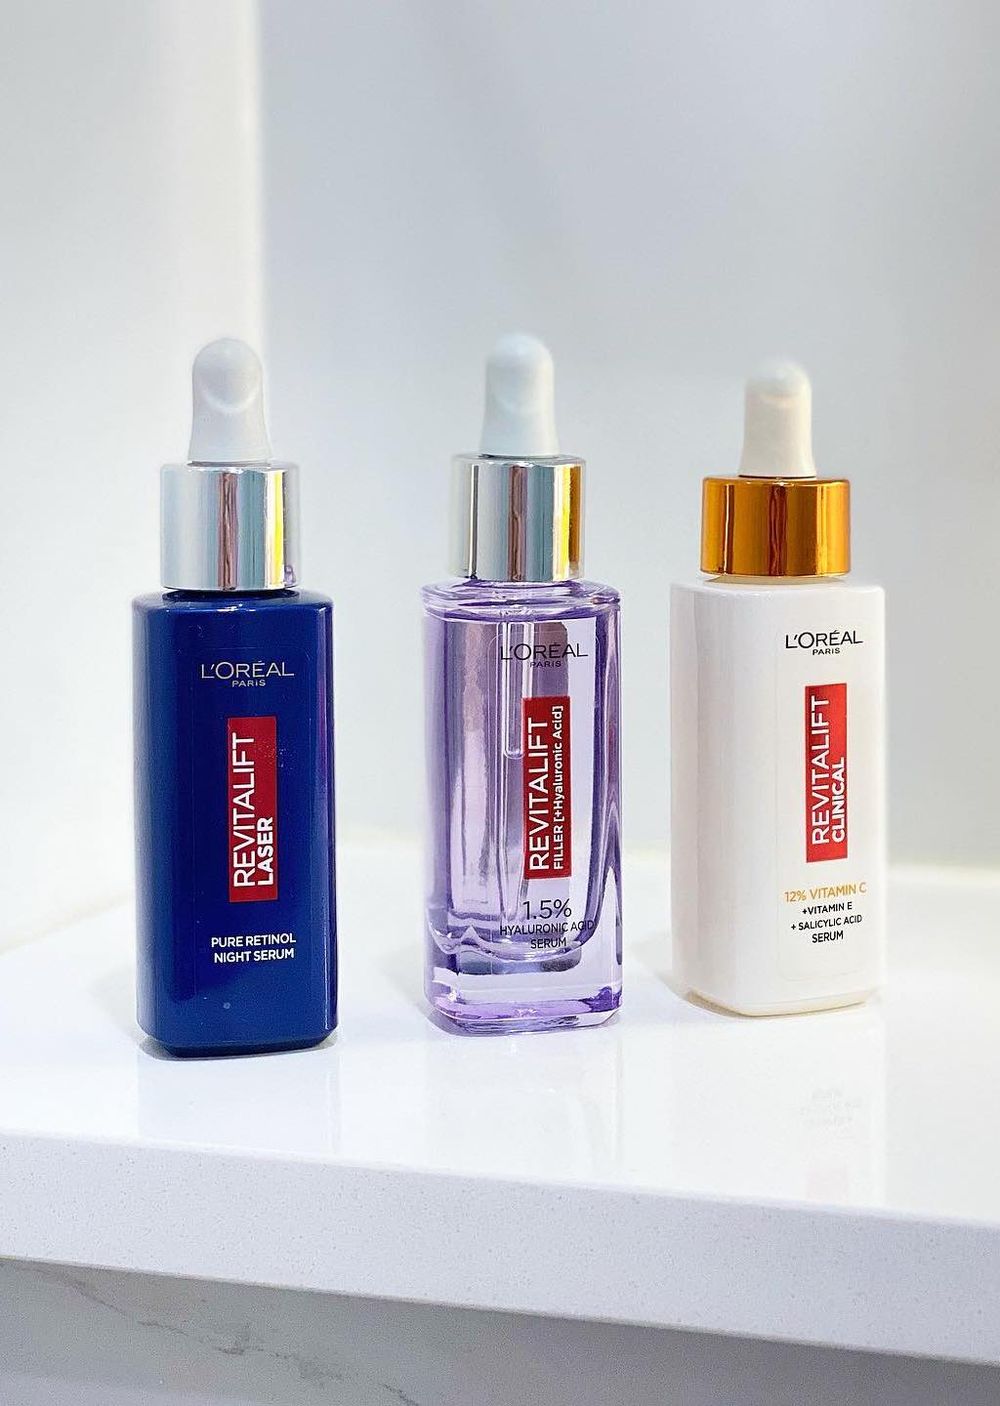 L’Oréal Skincare Review: Is the Brand Worth it?